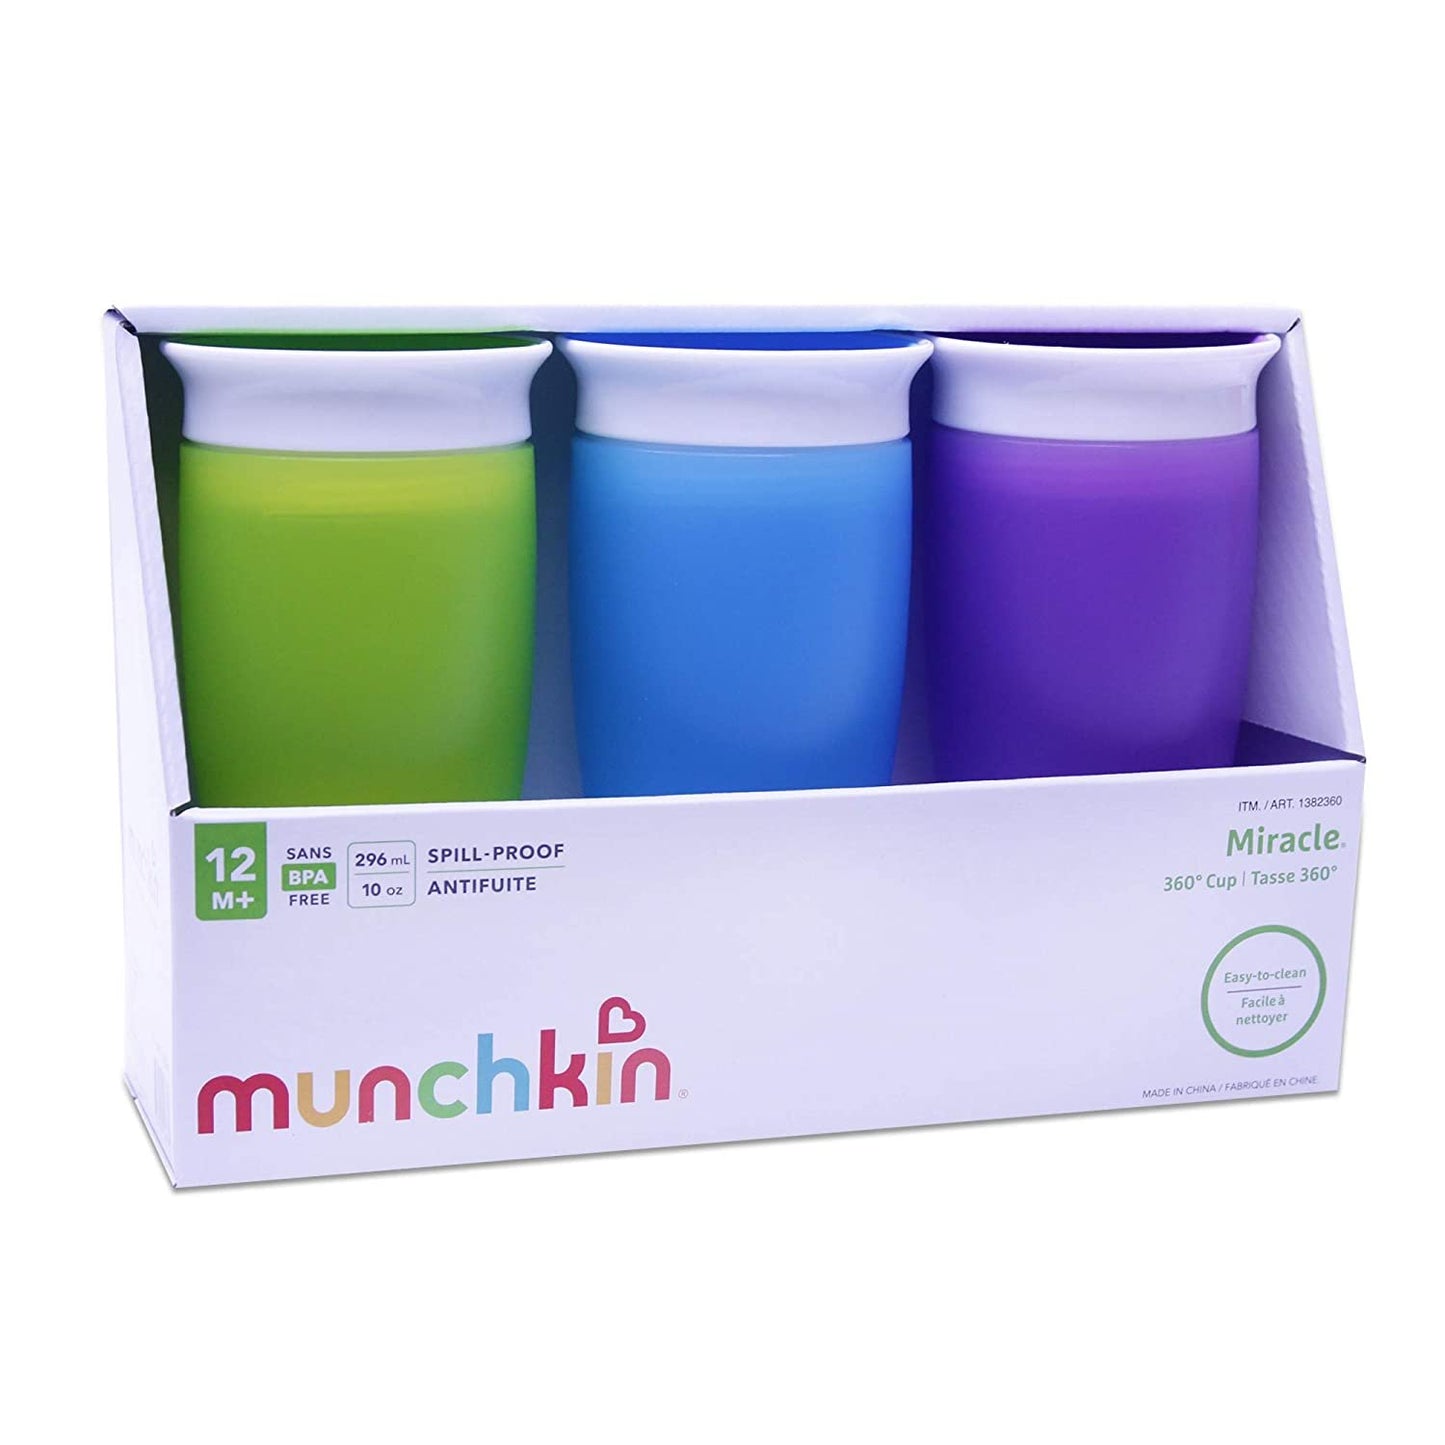 Munchkin Miracle 360 BPA Free Sippy Cup 296 mL/10 Oz 3 Count, Blue/Green/Purple